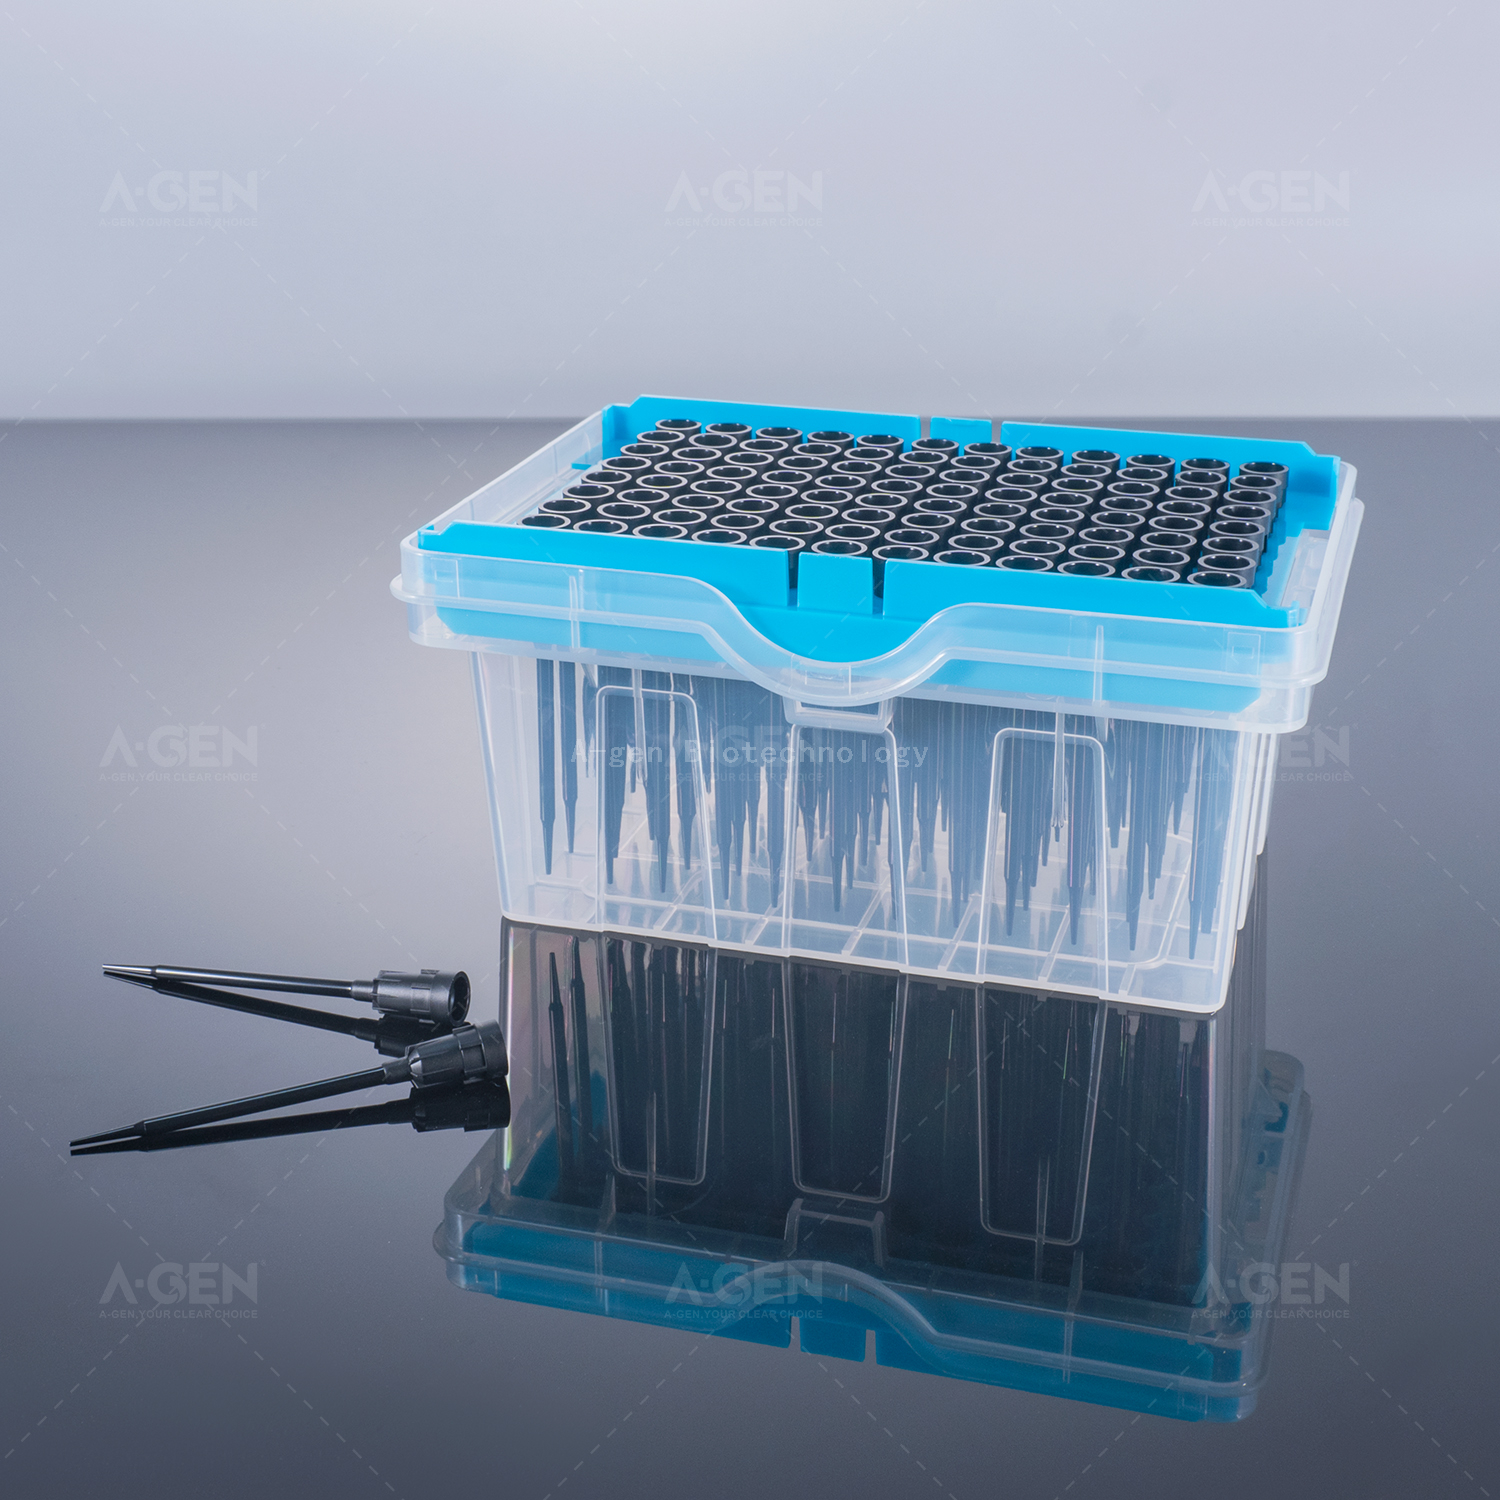 Tecan LiHa Conductive 50μL PP Pipette Tip (Racked,sterilized) TTF-50C-RSL Low Retention for Liquid Handling with filter